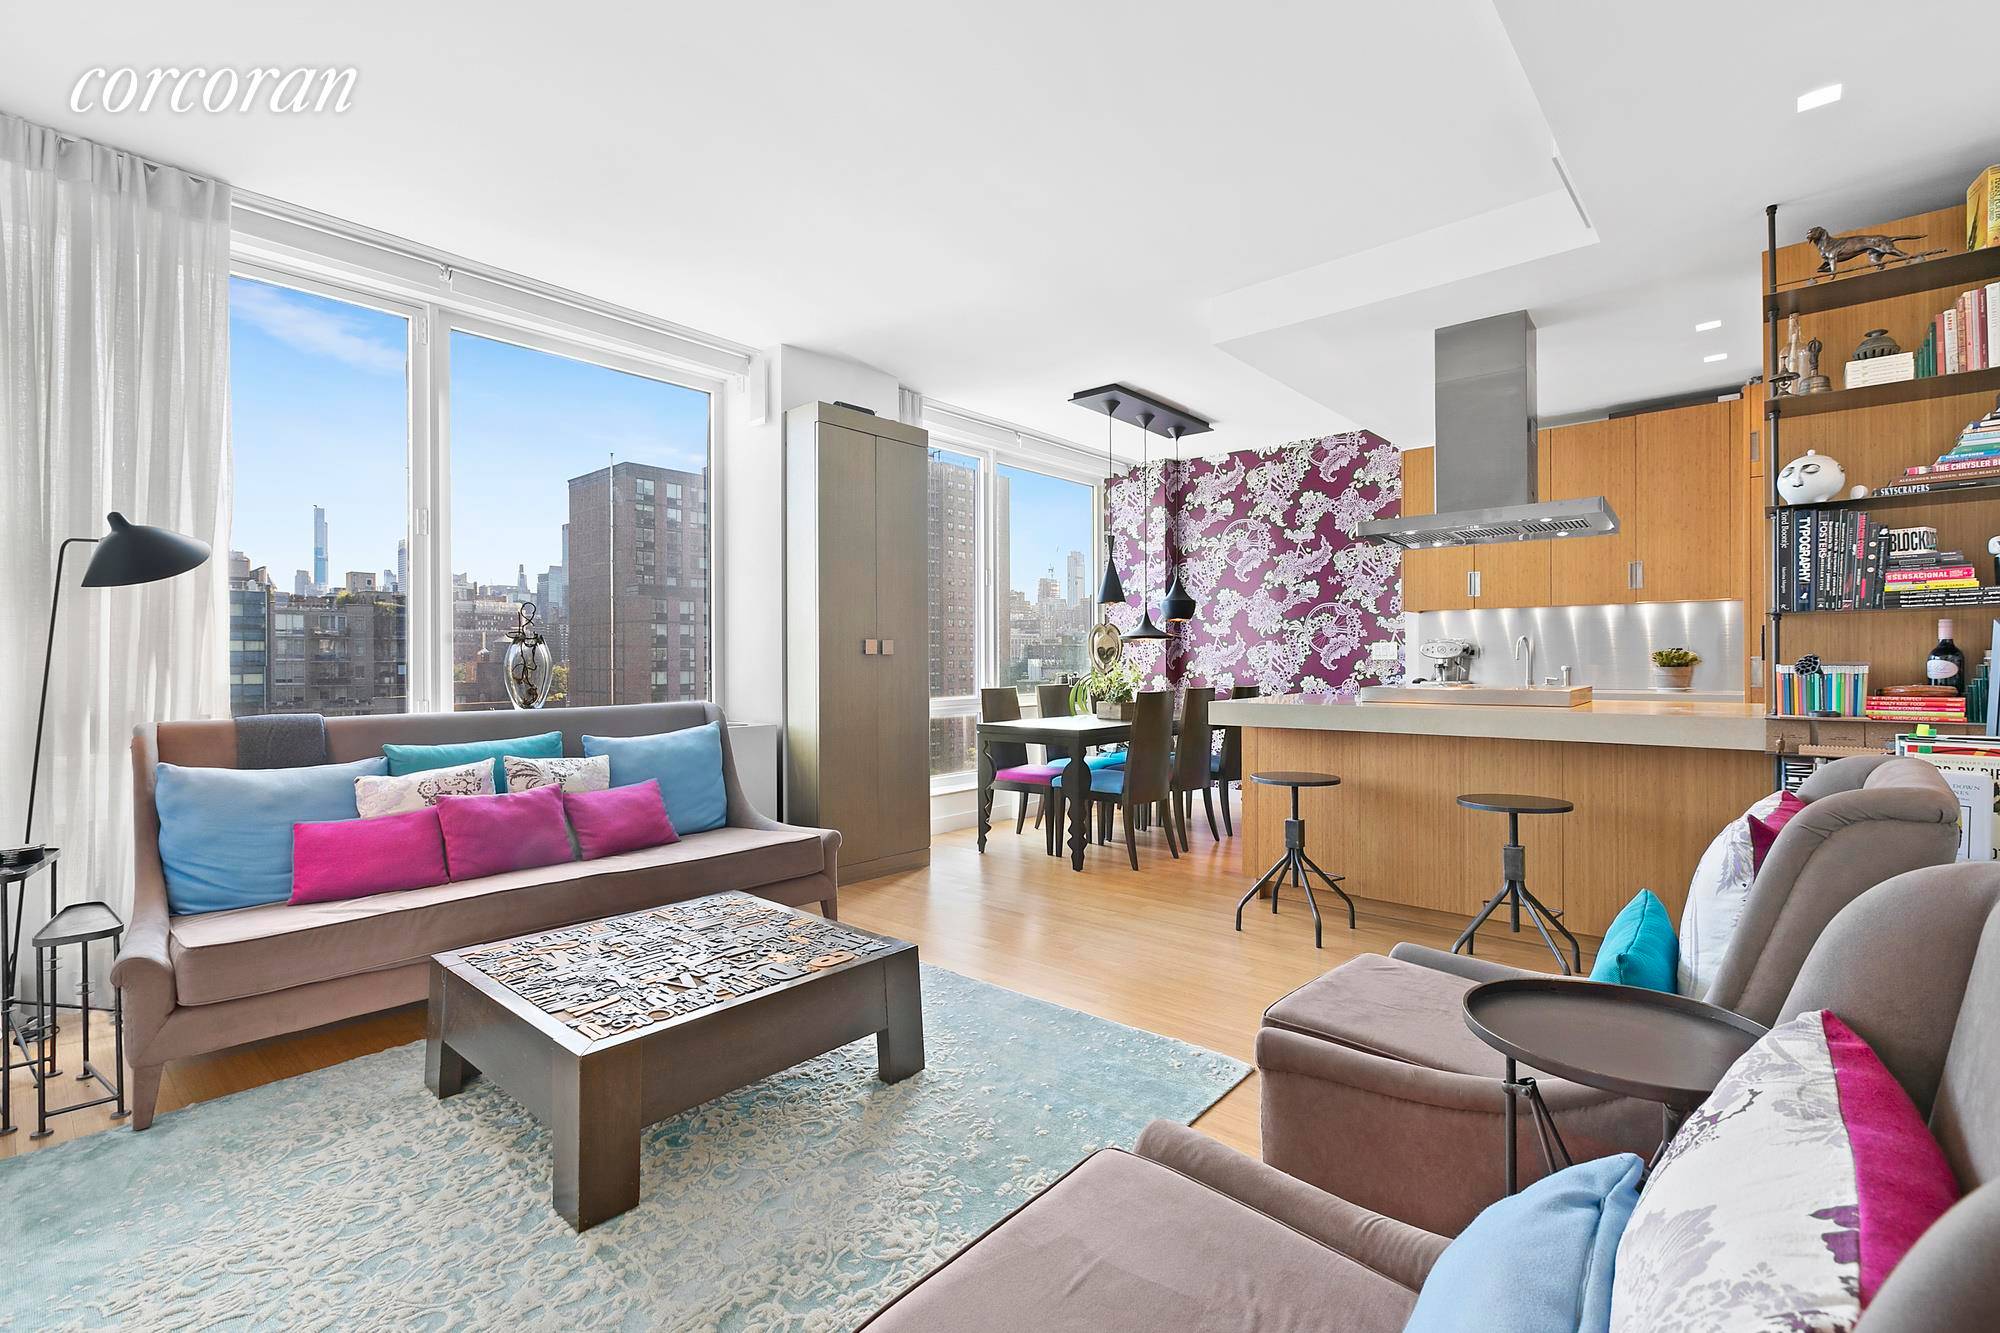 Residence 1102 is a unique and luxurious designer one bedroom with high ceilings and open views to the North, the High Line, the city skyline, and Hudson Yards.